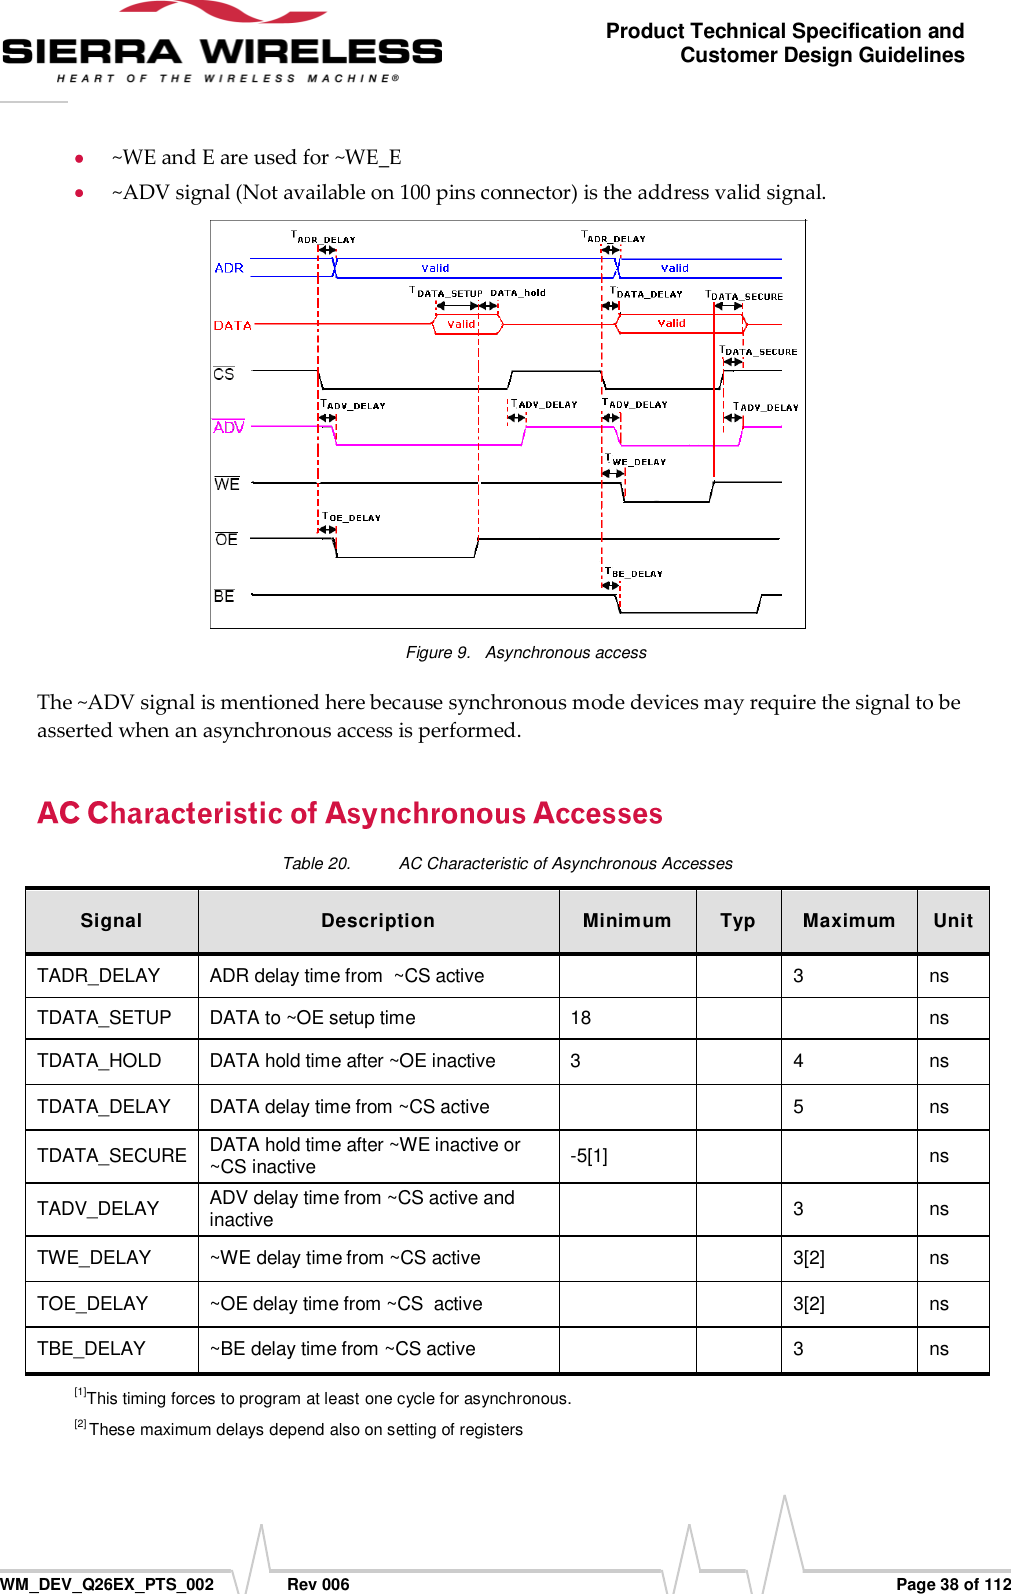      WM_DEV_Q26EX_PTS_002  Rev 006  Page 38 of 112 Product Technical Specification and Customer Design Guidelines  ~WE and E are used for ~WE_E   ~ADV signal (Not available on 100 pins connector) is the address valid signal.  Figure 9.  Asynchronous access The ~ADV signal is mentioned here because synchronous mode devices may require the signal to be asserted when an asynchronous access is performed. Table 20.  AC Characteristic of Asynchronous Accesses Signal Description Minimum Typ Maximum Unit TADR_DELAY ADR delay time from  ~CS active   3 ns TDATA_SETUP DATA to ~OE setup time 18   ns TDATA_HOLD  DATA hold time after ~OE inactive  3  4 ns TDATA_DELAY DATA delay time from ~CS active   5 ns TDATA_SECURE DATA hold time after ~WE inactive or ~CS inactive -5[1]   ns TADV_DELAY ADV delay time from ~CS active and inactive   3 ns TWE_DELAY ~WE delay time from ~CS active   3[2] ns TOE_DELAY ~OE delay time from ~CS  active   3[2] ns TBE_DELAY ~BE delay time from ~CS active   3 ns [1]This timing forces to program at least one cycle for asynchronous. [2] These maximum delays depend also on setting of registers 